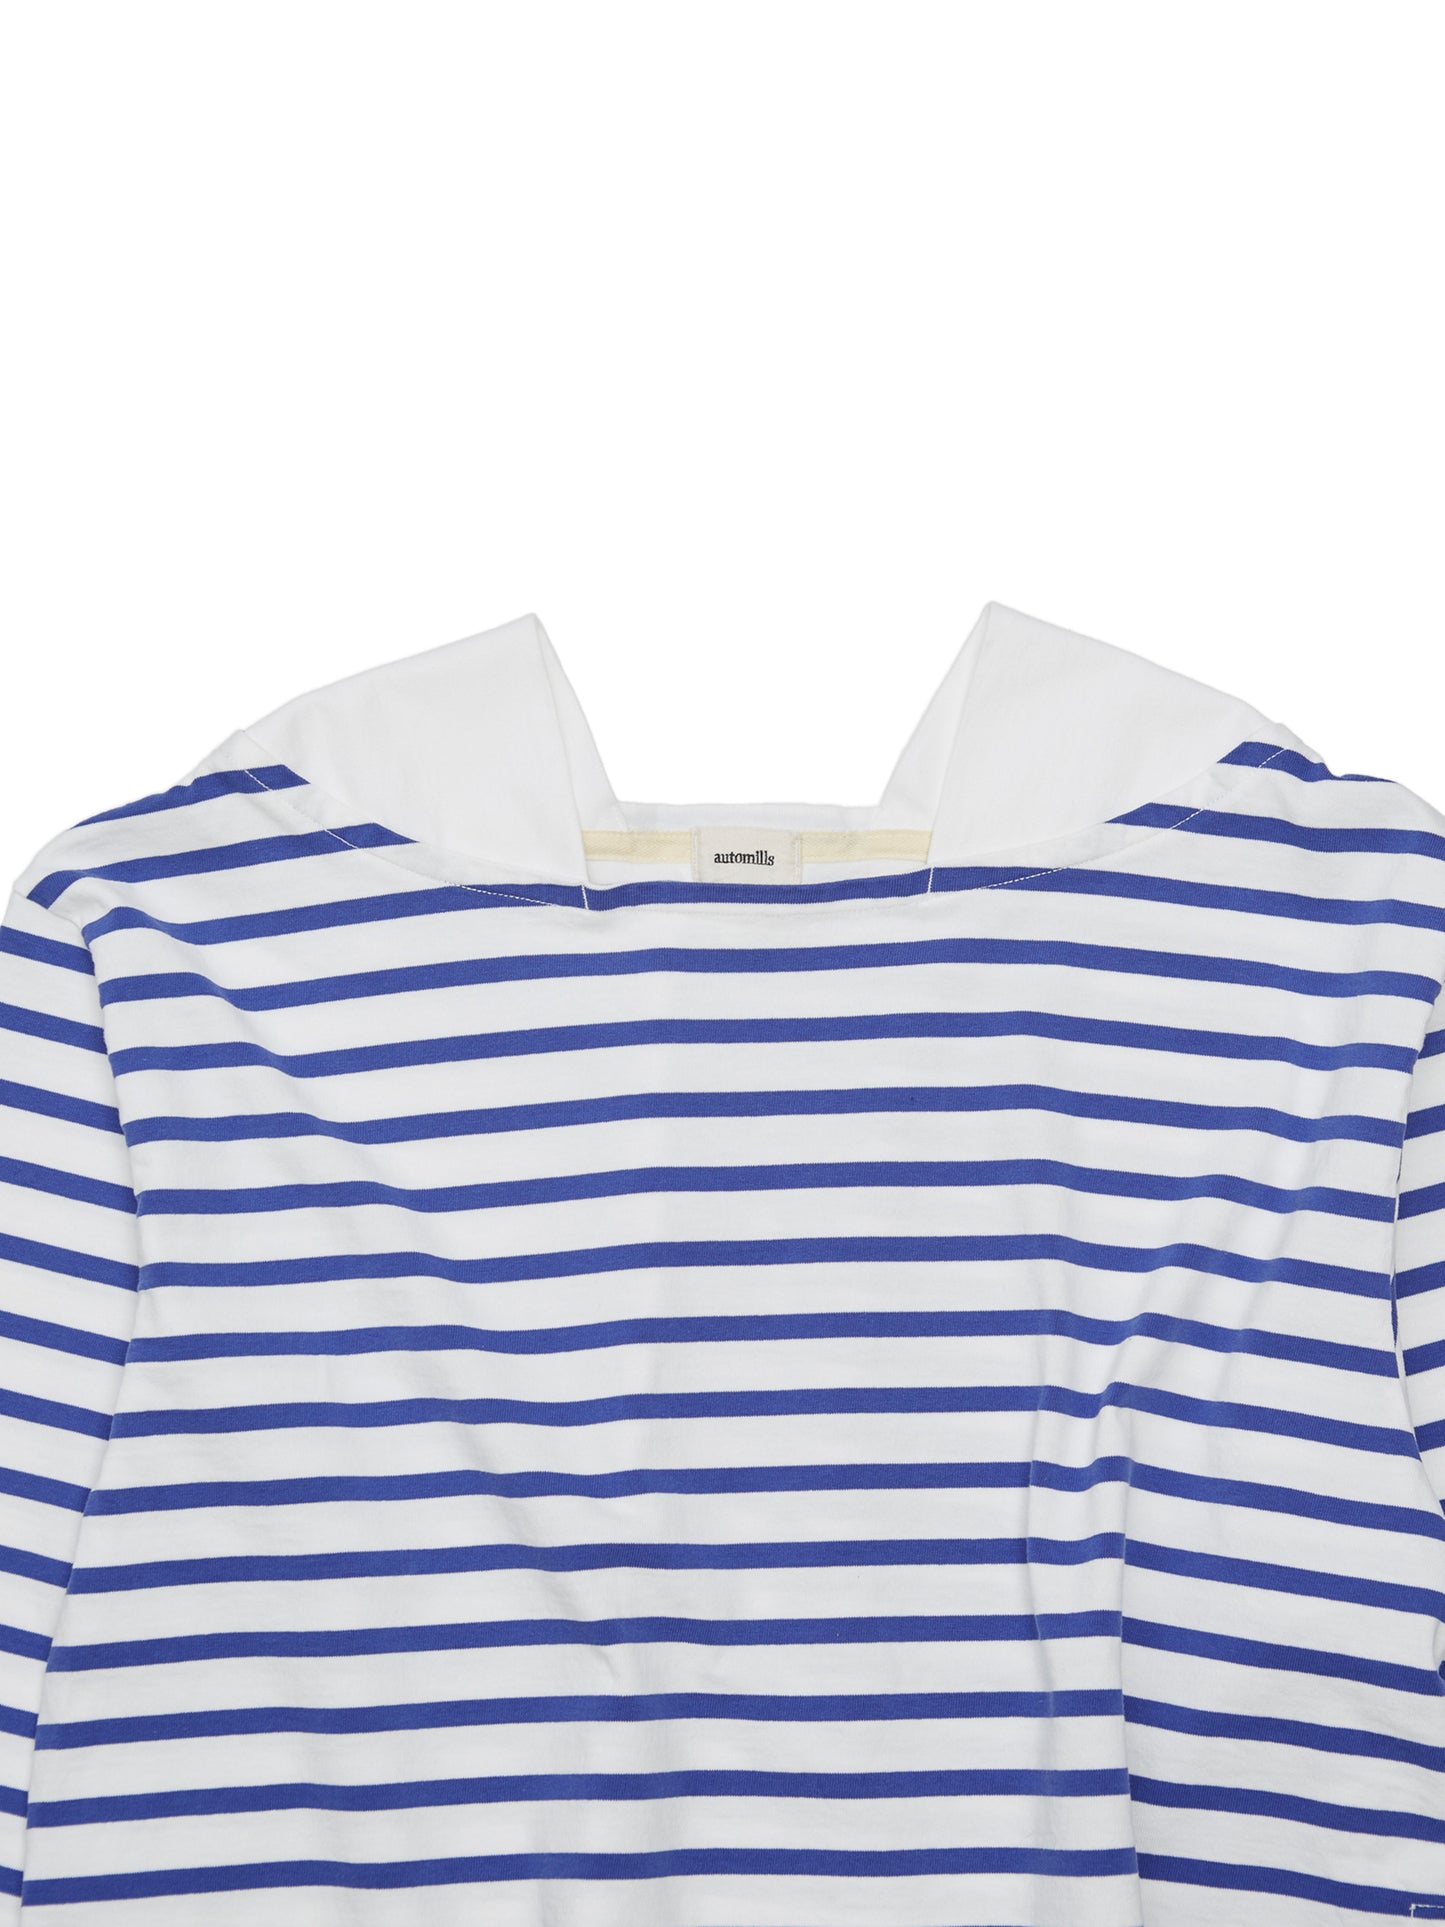 BAGGY BOAT L/S TEE COTTON BORDER JERSEY AM-C0201 White/Blue